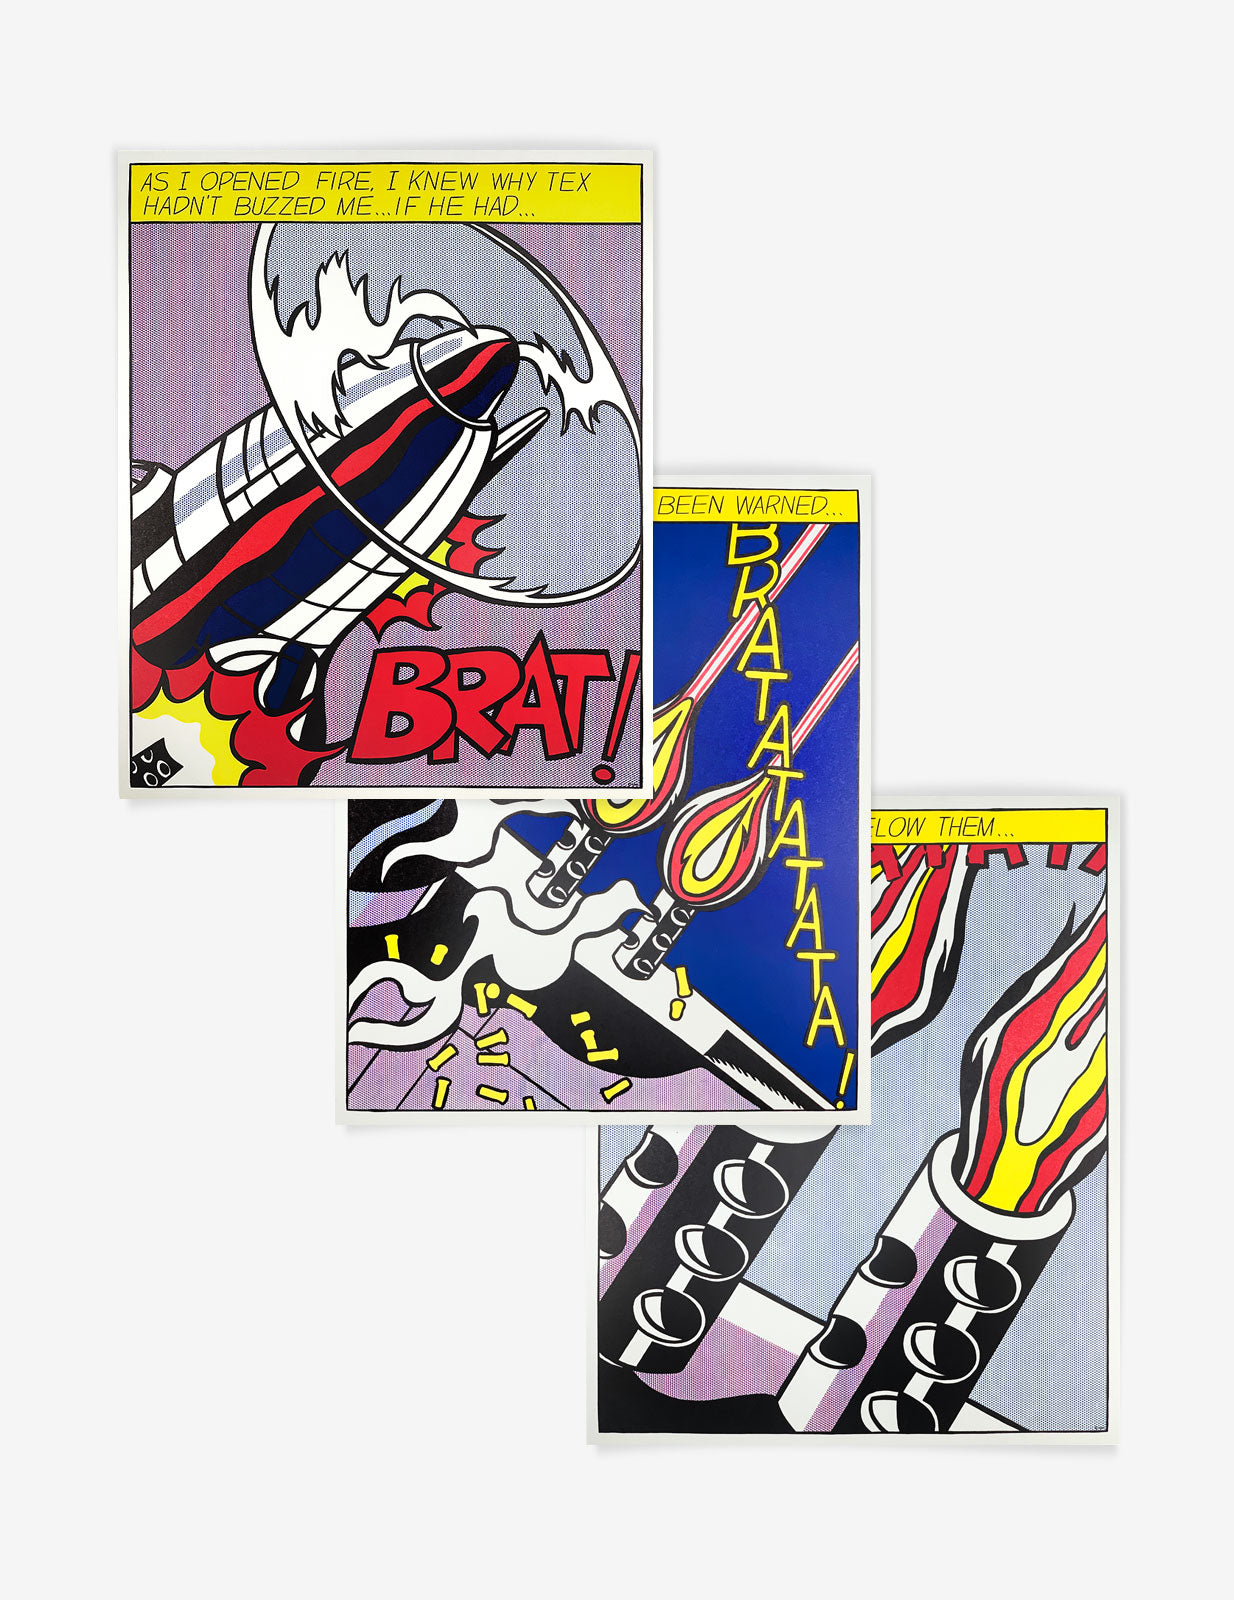 Roy Lichtenstein "as i opened fire" prints for sale